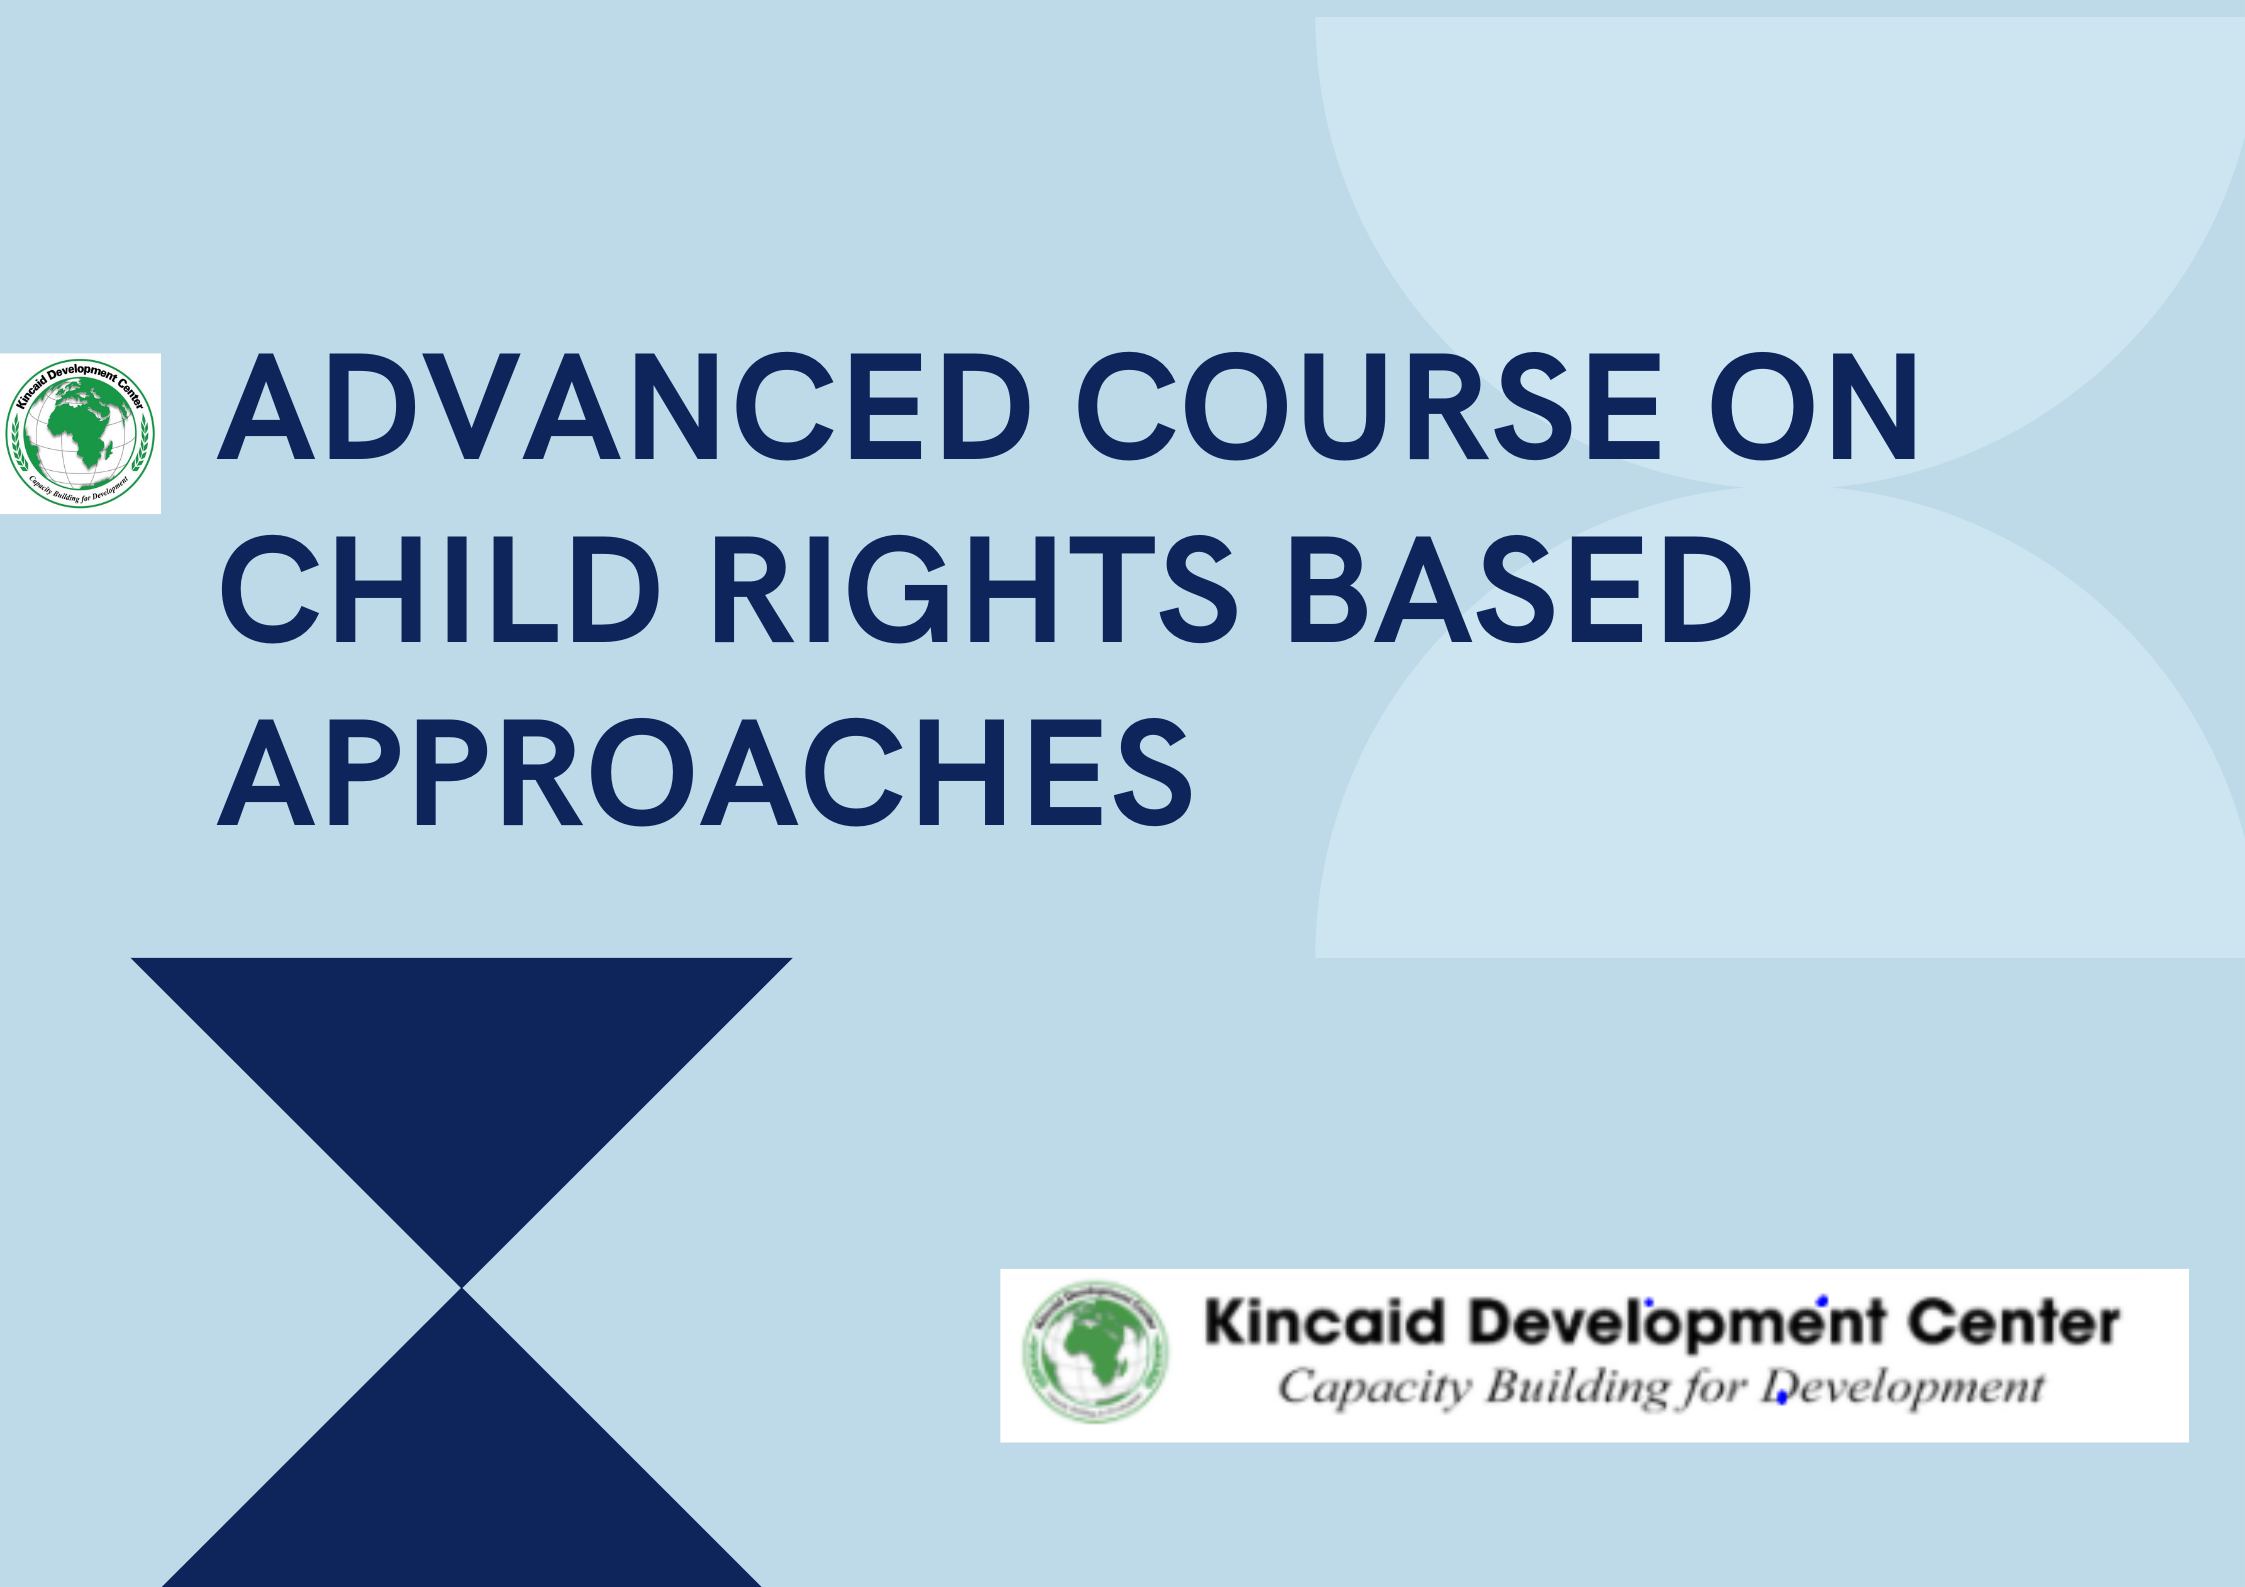 ADVANCED COURSE ON CHILD RIGHTS BASED APPROACHES, Nairobi, Kenya